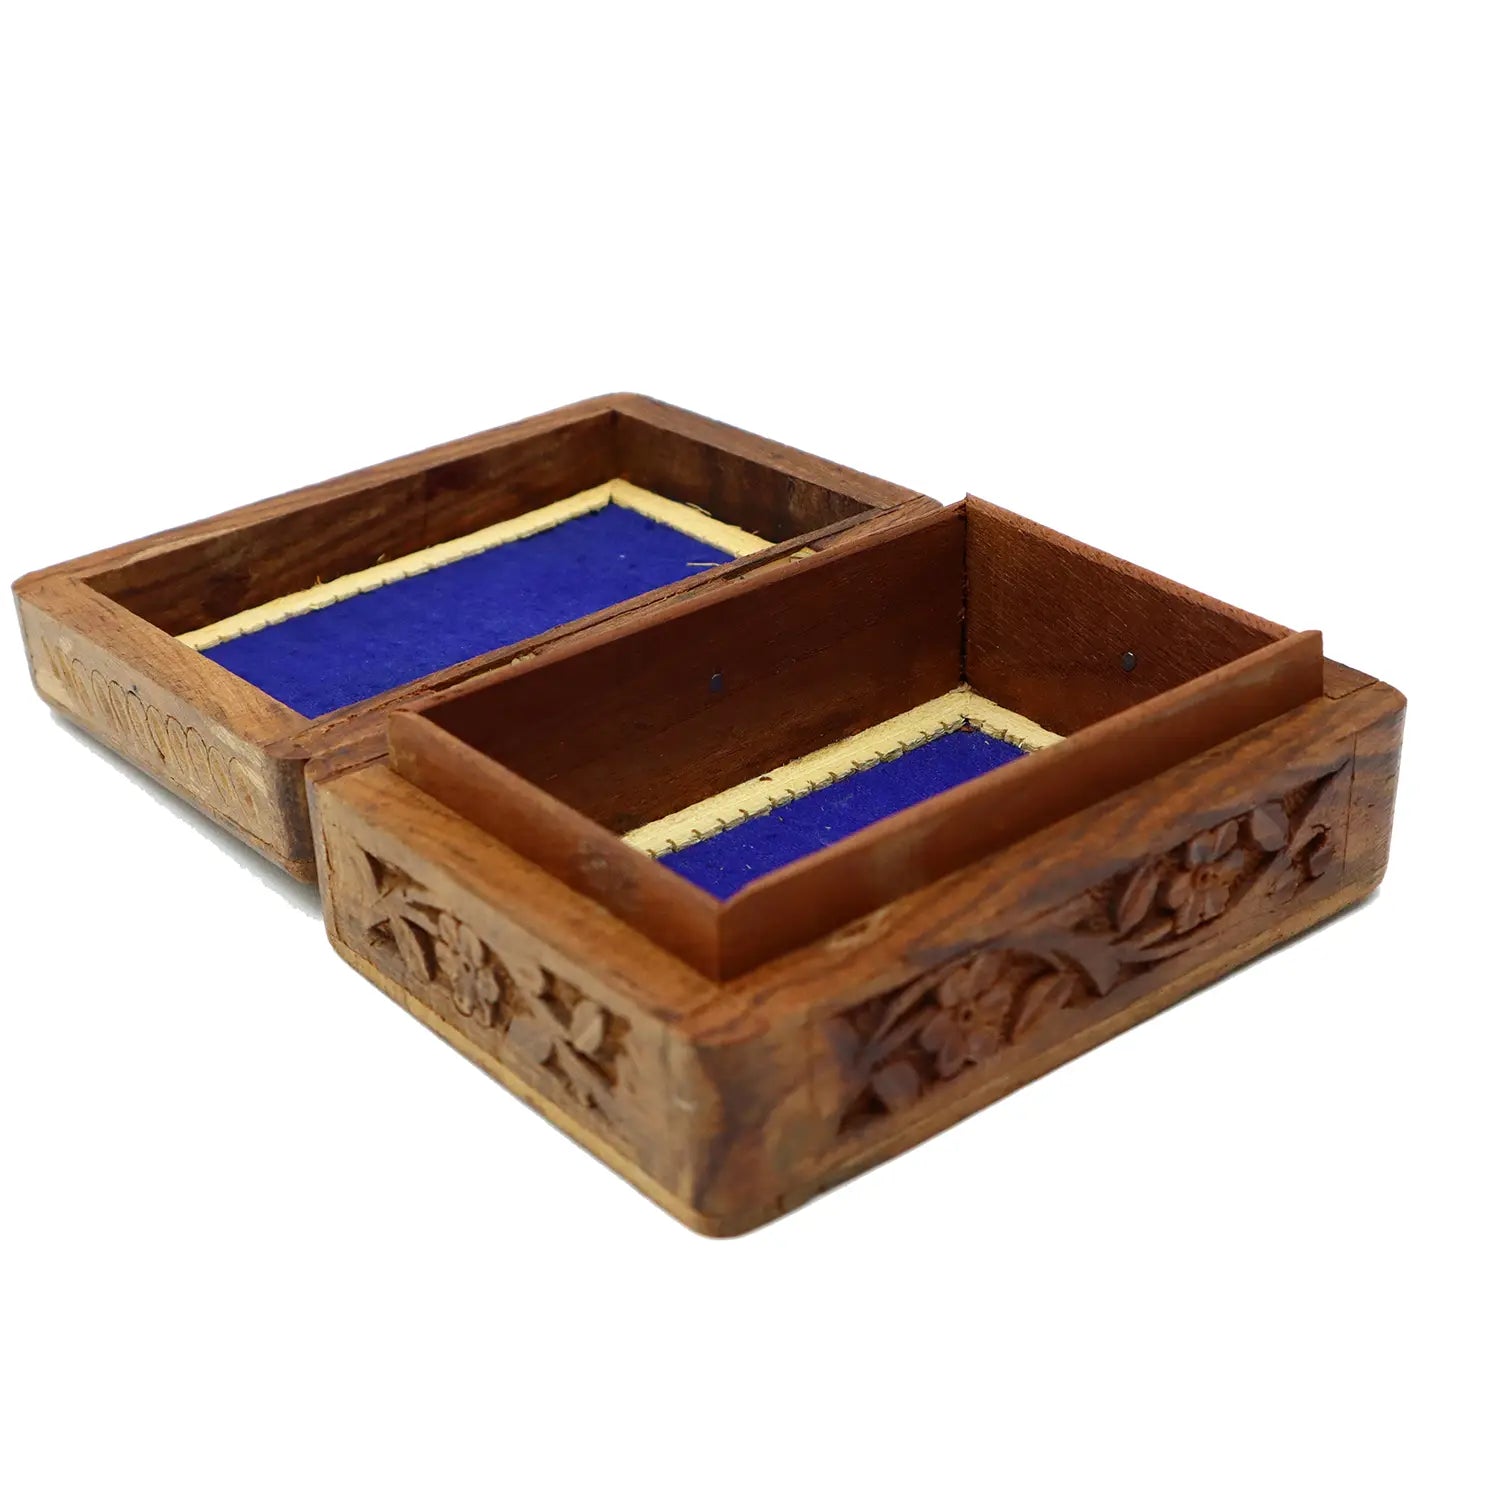 Open Box w/ Royal Blue Lining - Antique Primitive Handcarved Hardwood Jewelry Box w/ Carved Floral Designs